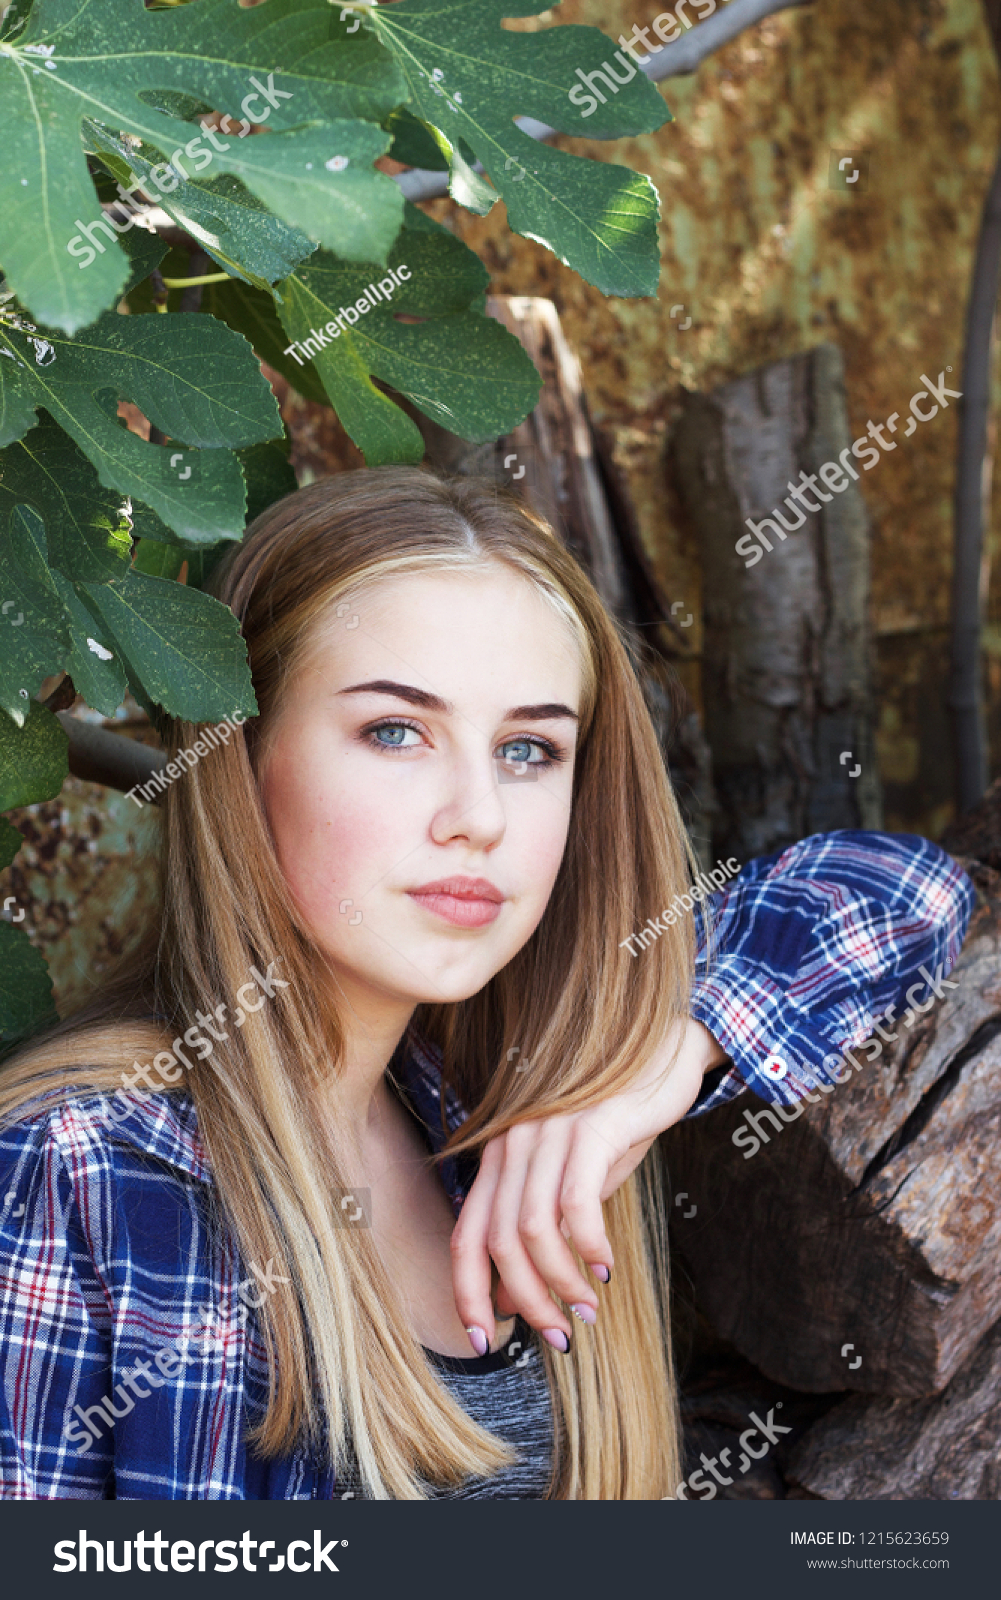 A divine, blue-eyed, blonde-haired, teenage girl in a checkered shirt  #1215623659